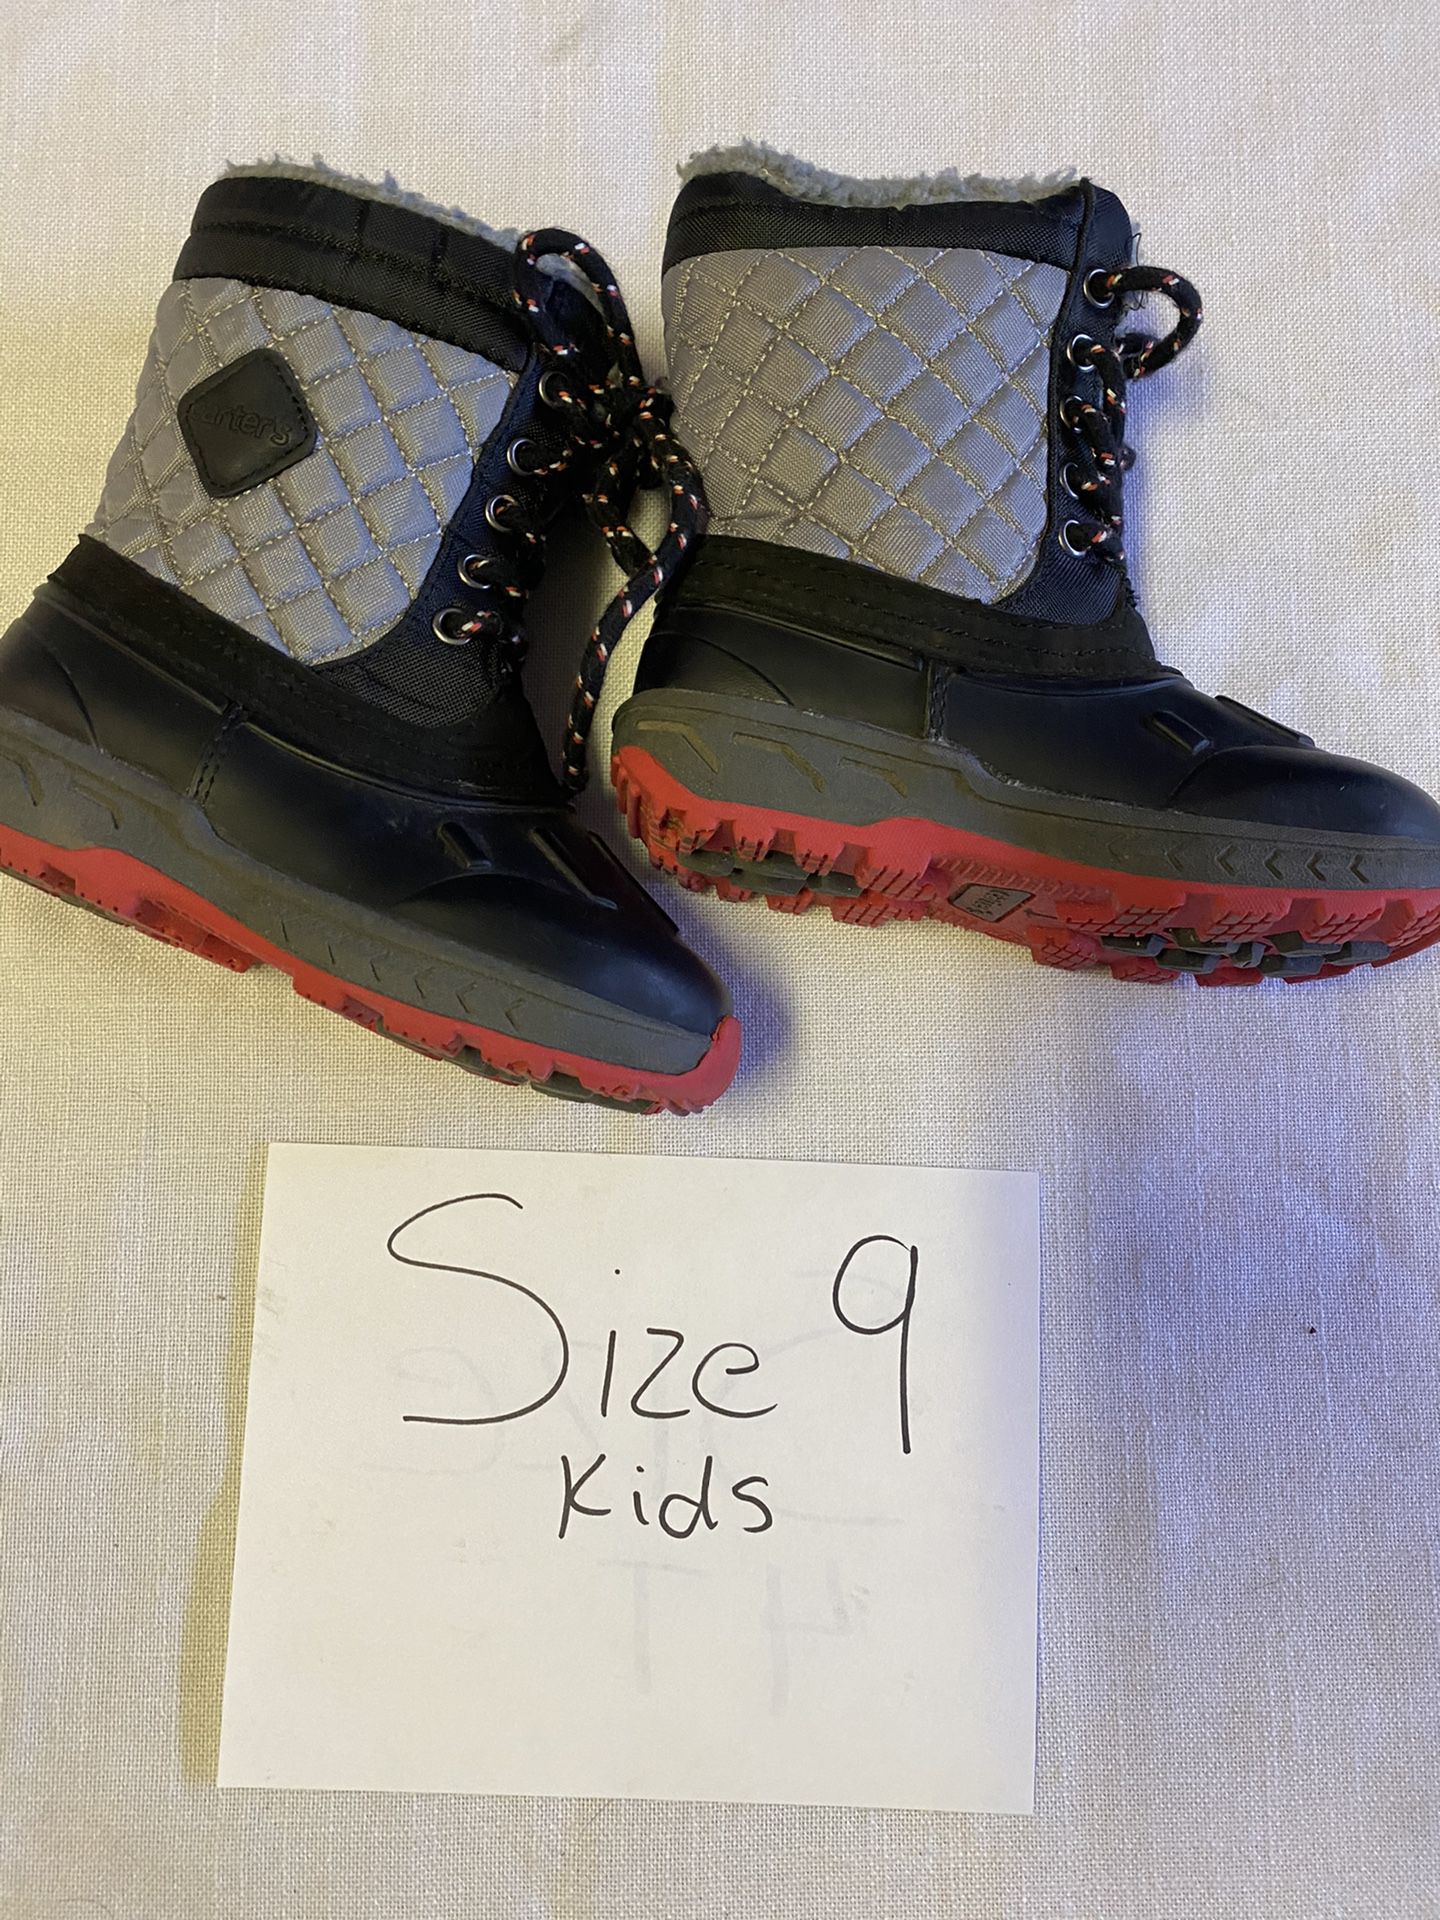 Snow Boots Size 9t